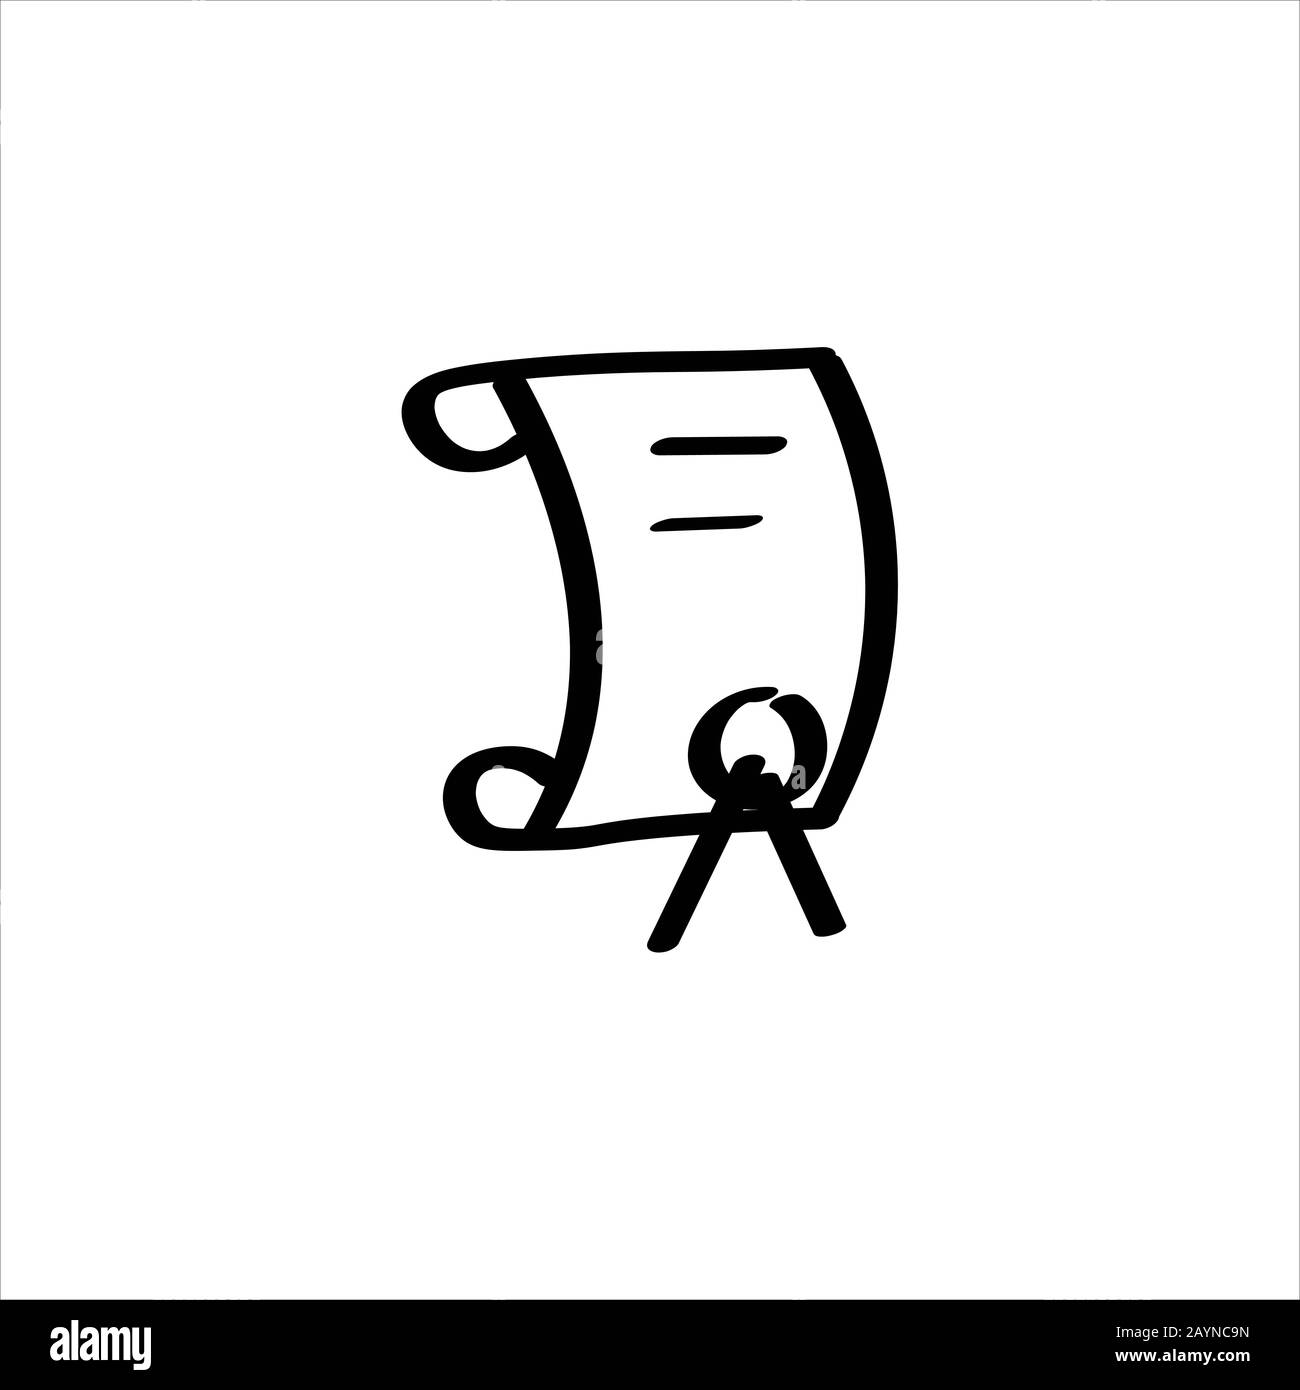 Icon sign with certificate or charter for Courses section. Black hand draw doodle sketch can be used in greeting cards, posters, flyers, banners, logos, web design, CV etc. Vector illustration. EPS10 Stock Vector